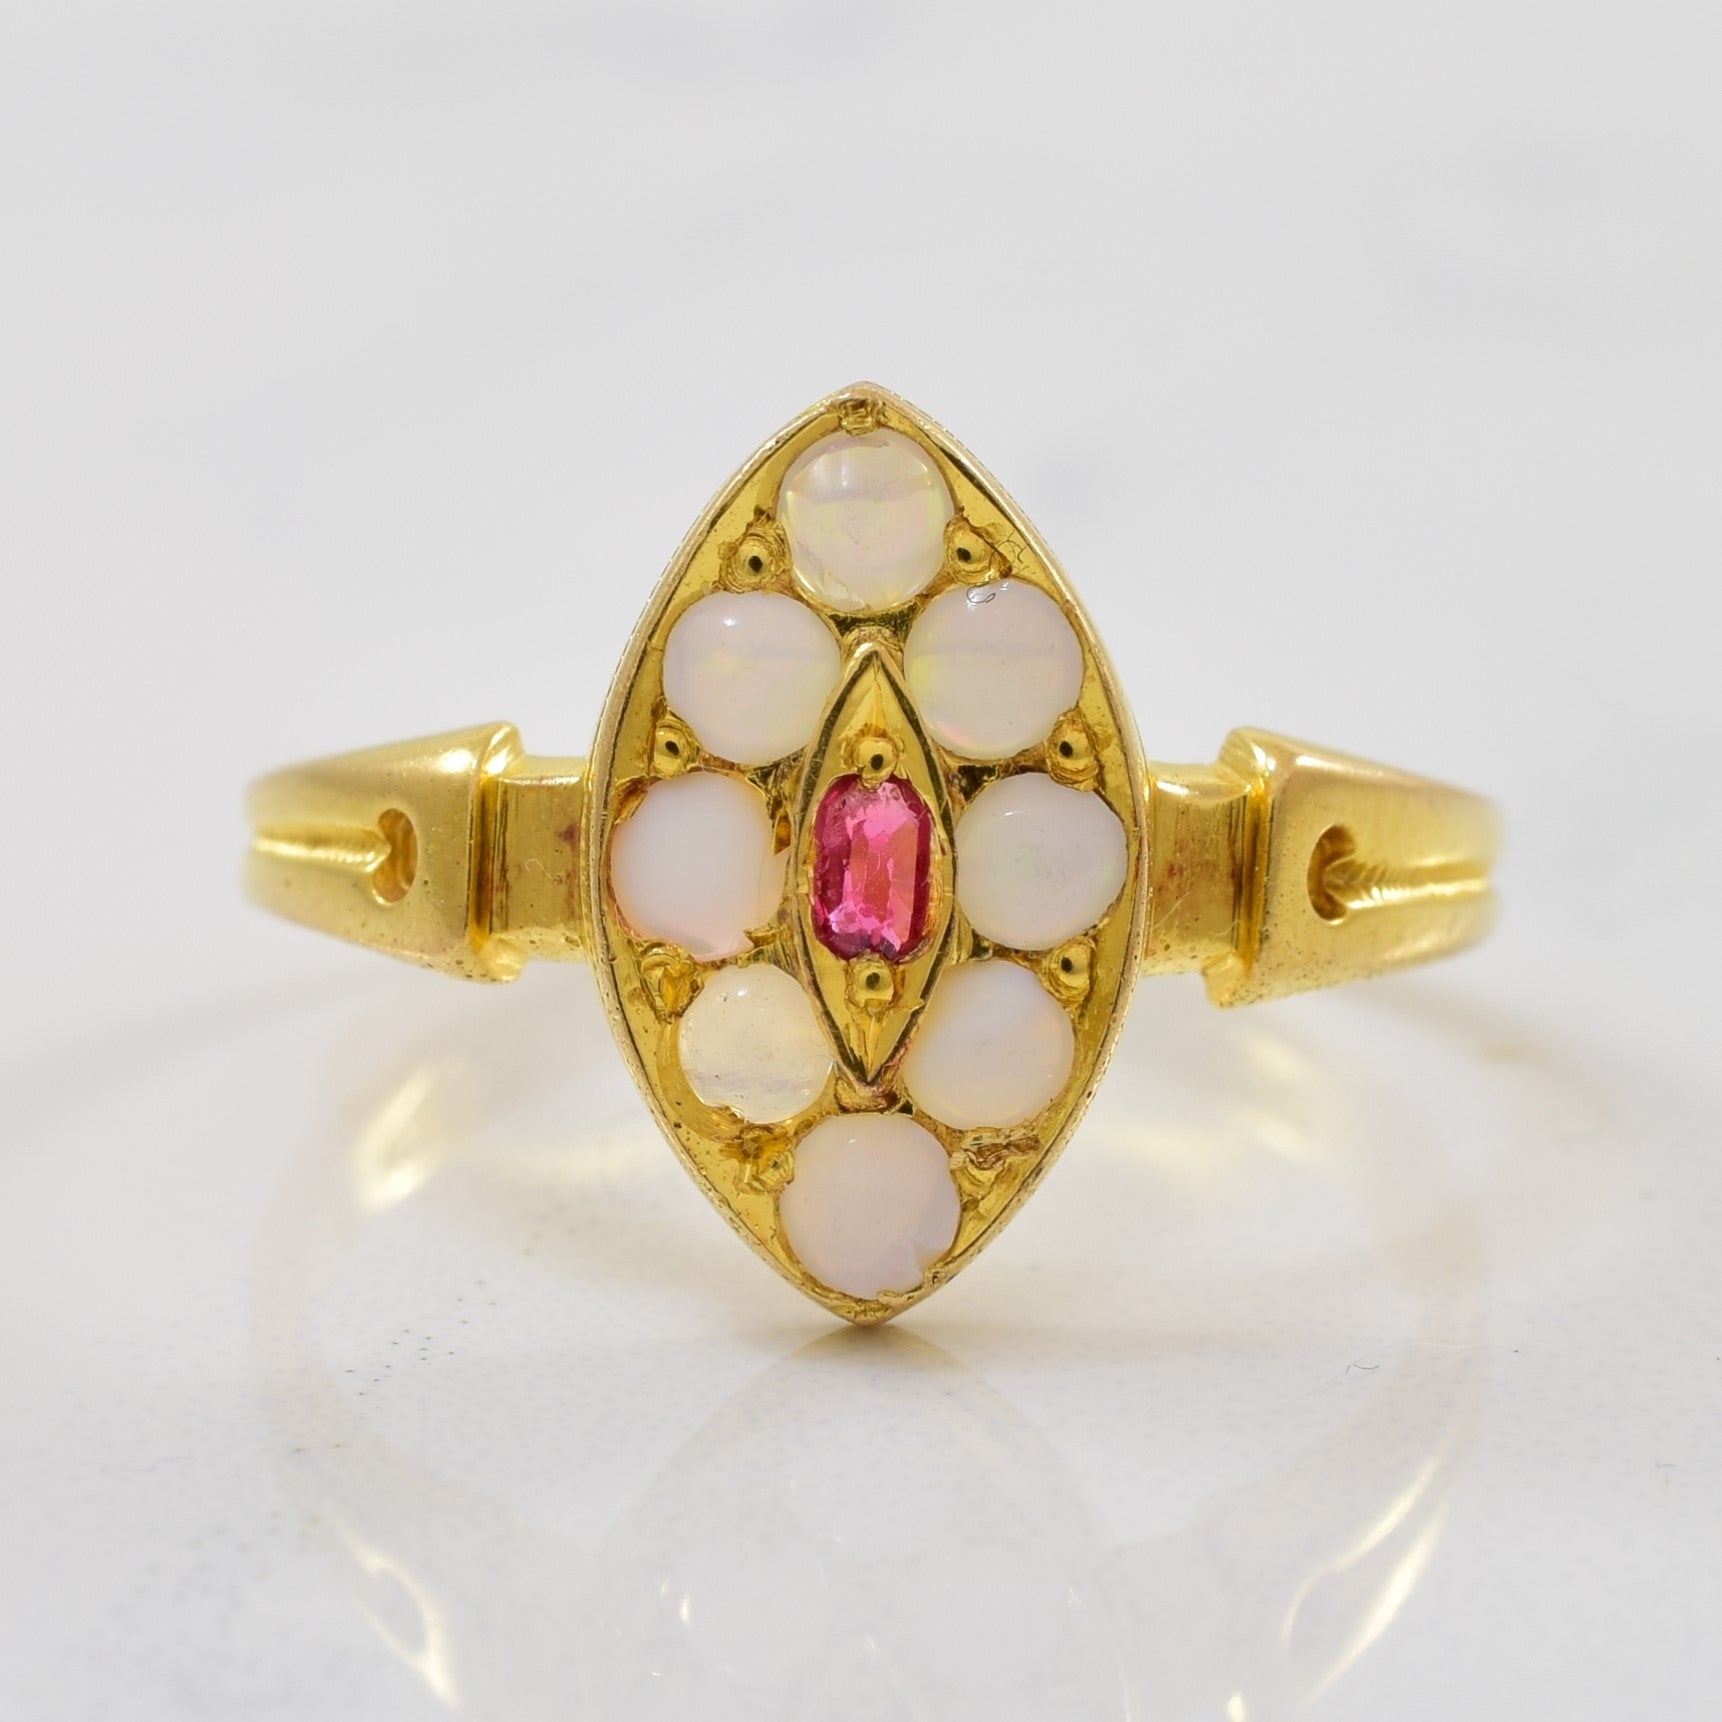 1870s Opal & Spinel Ring | 0.32ctw, 0.04ct | SZ 6.25 |